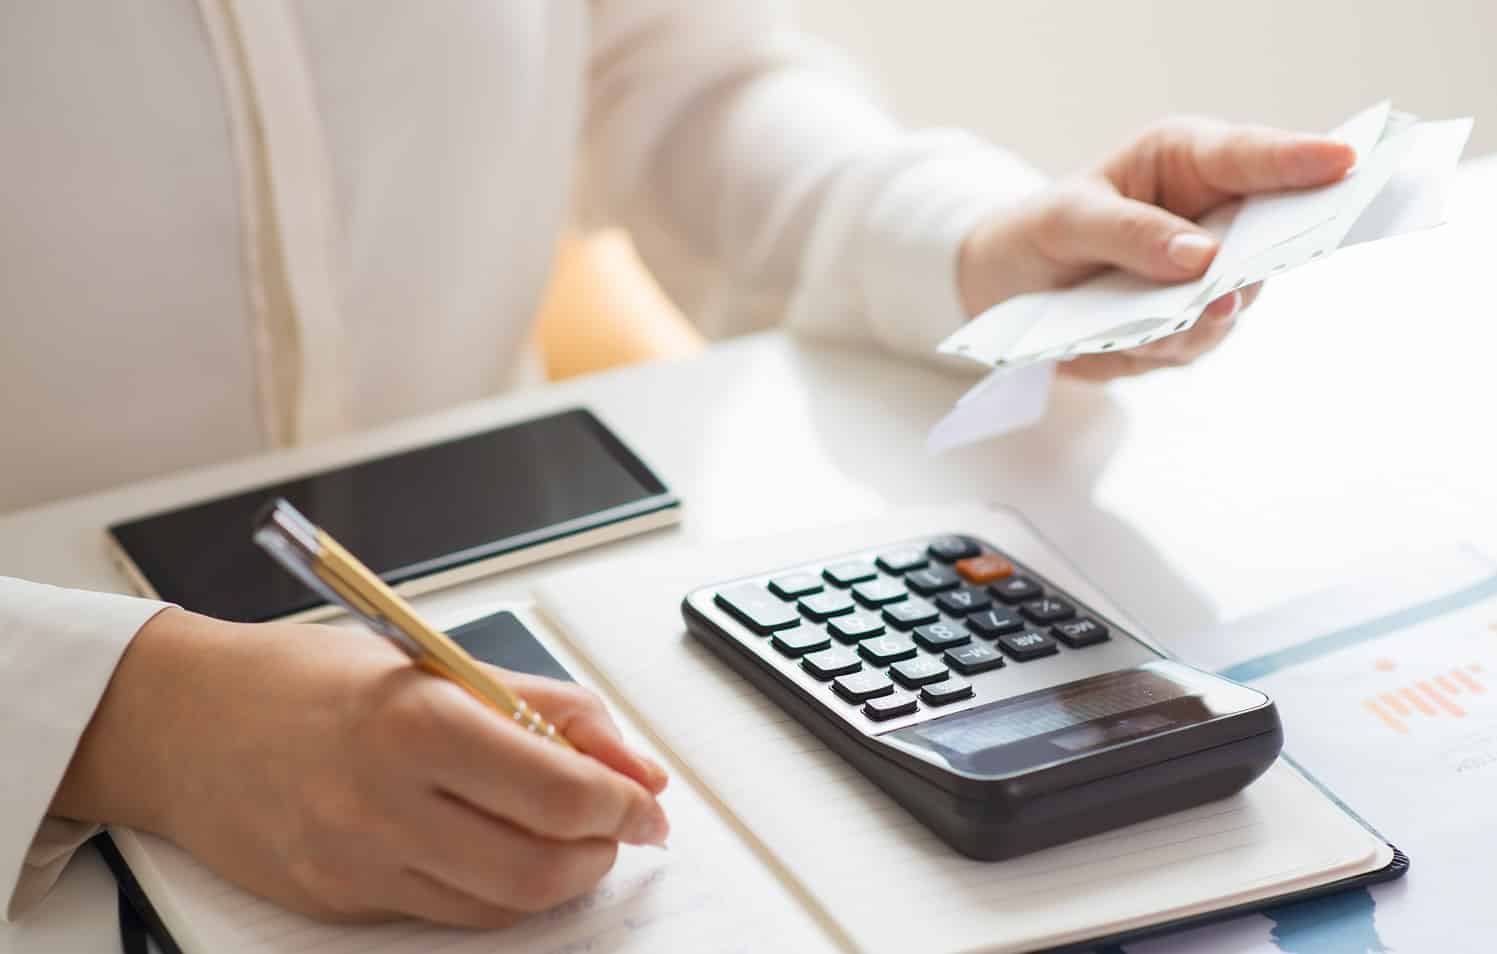 Closeup of person holding bills and calculating them. Notebook, calculator and smartphone lying on desk. Payment concept. Cropped view. Smart Pen Buyers’ Guide